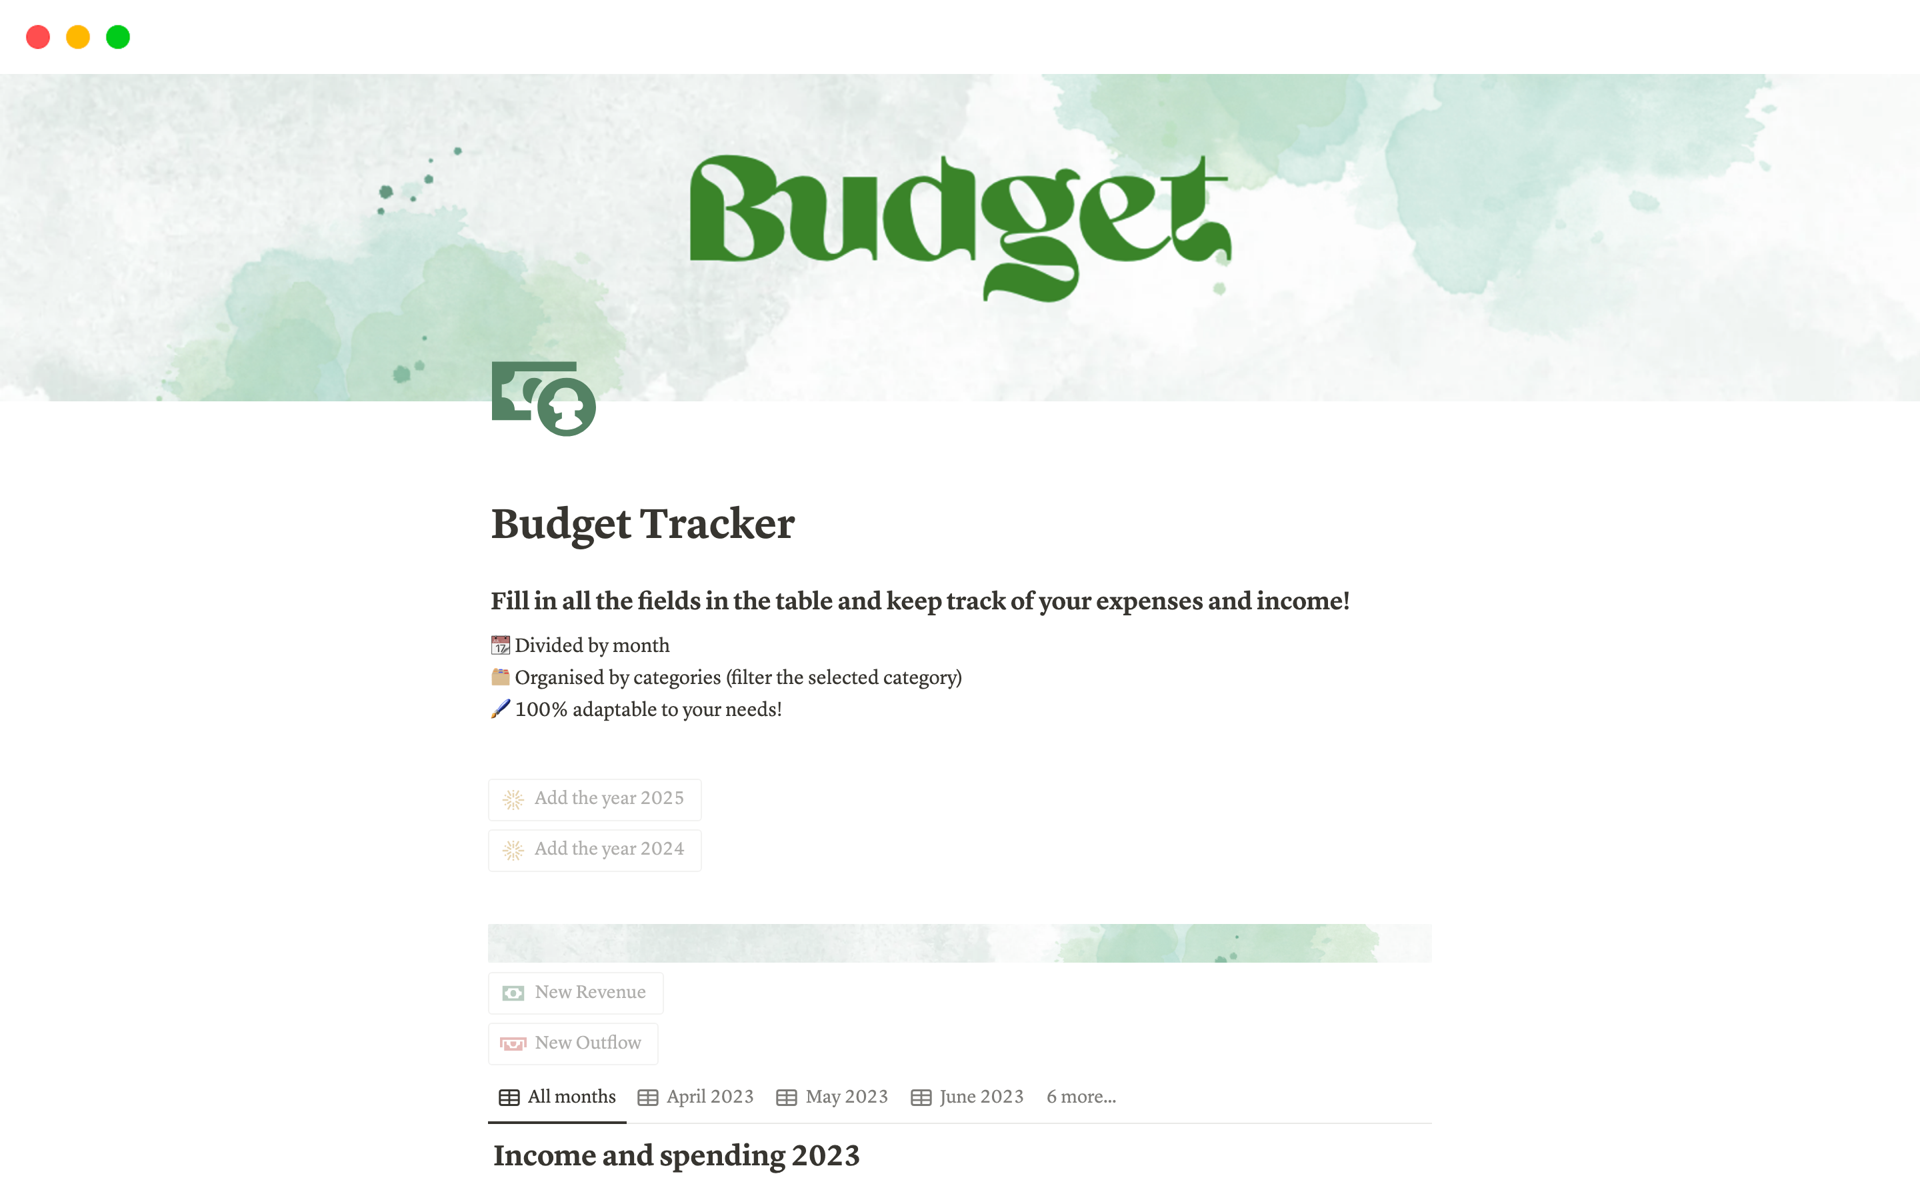 A handy tool to help you plan and track your monthly budget.